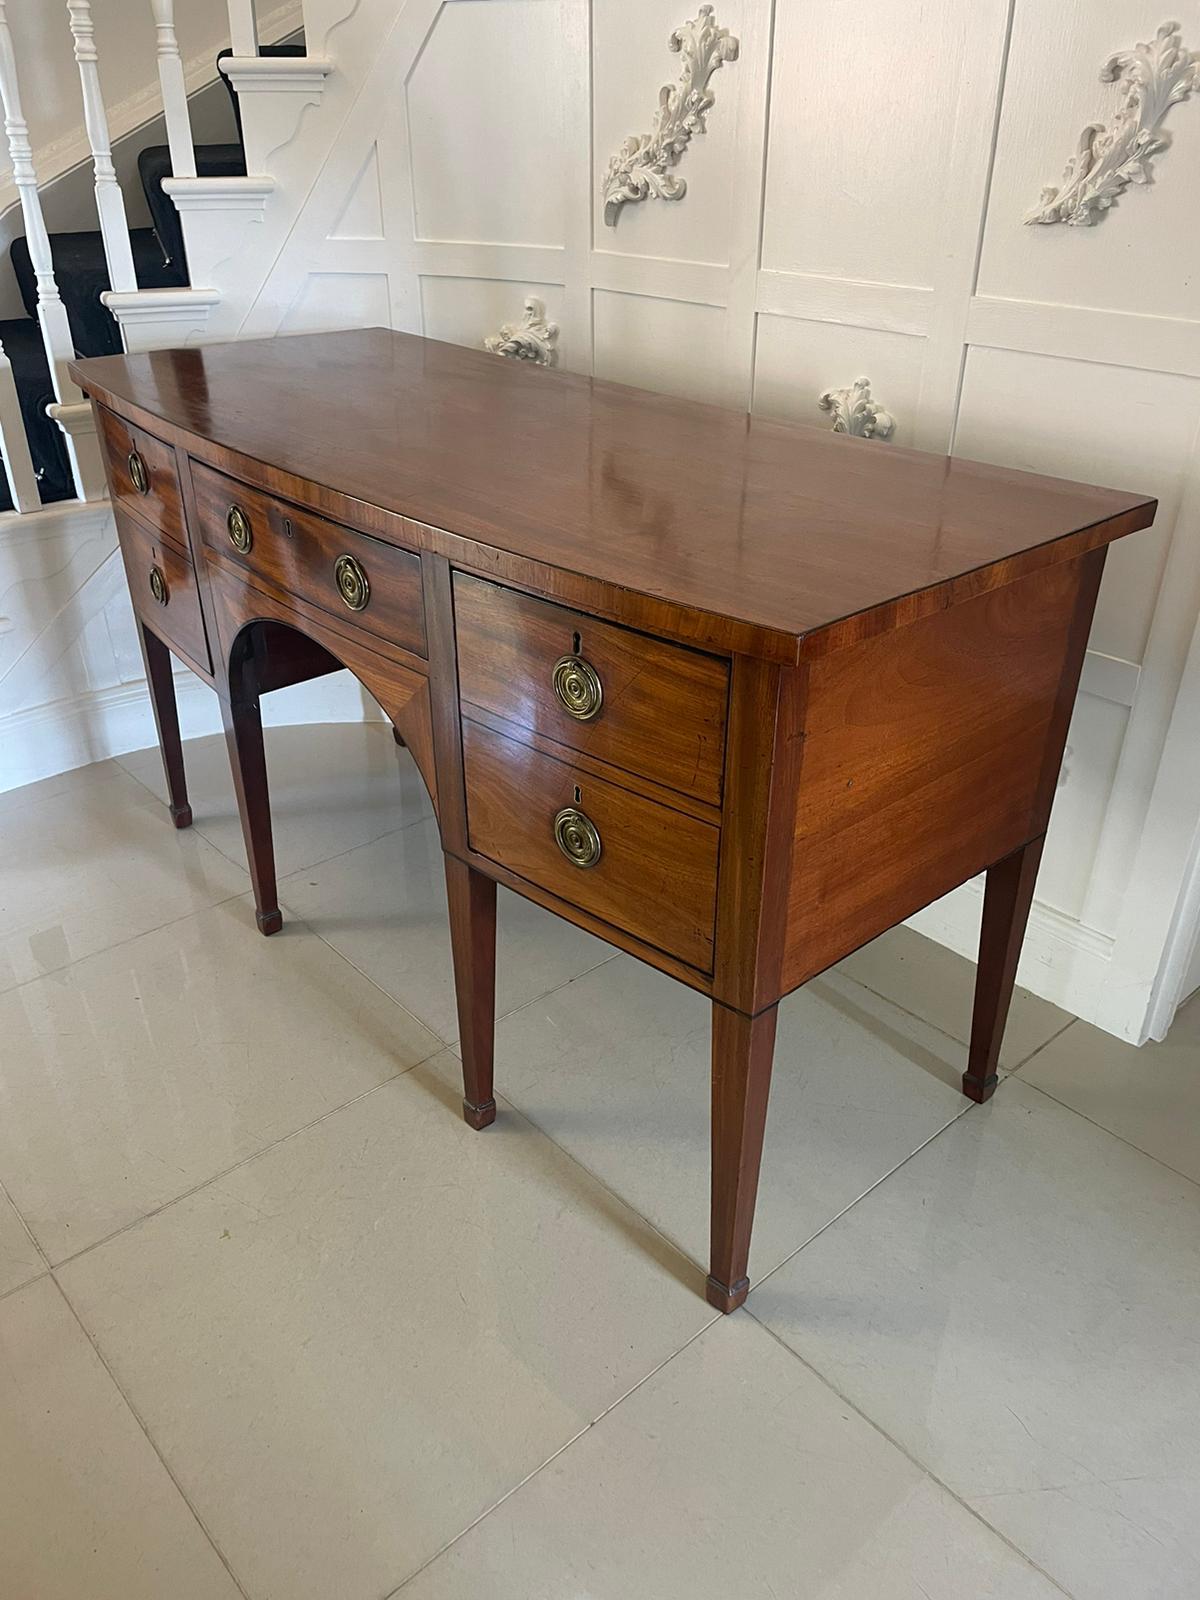 Antique George III quality mahogany bow fronted sideboard having a bow fronted figured mahogany top with inlaid ebony stringing above 3 bow fronted oak lined inlaid ebony drawers with circular brass handles standing on square tapering legs with